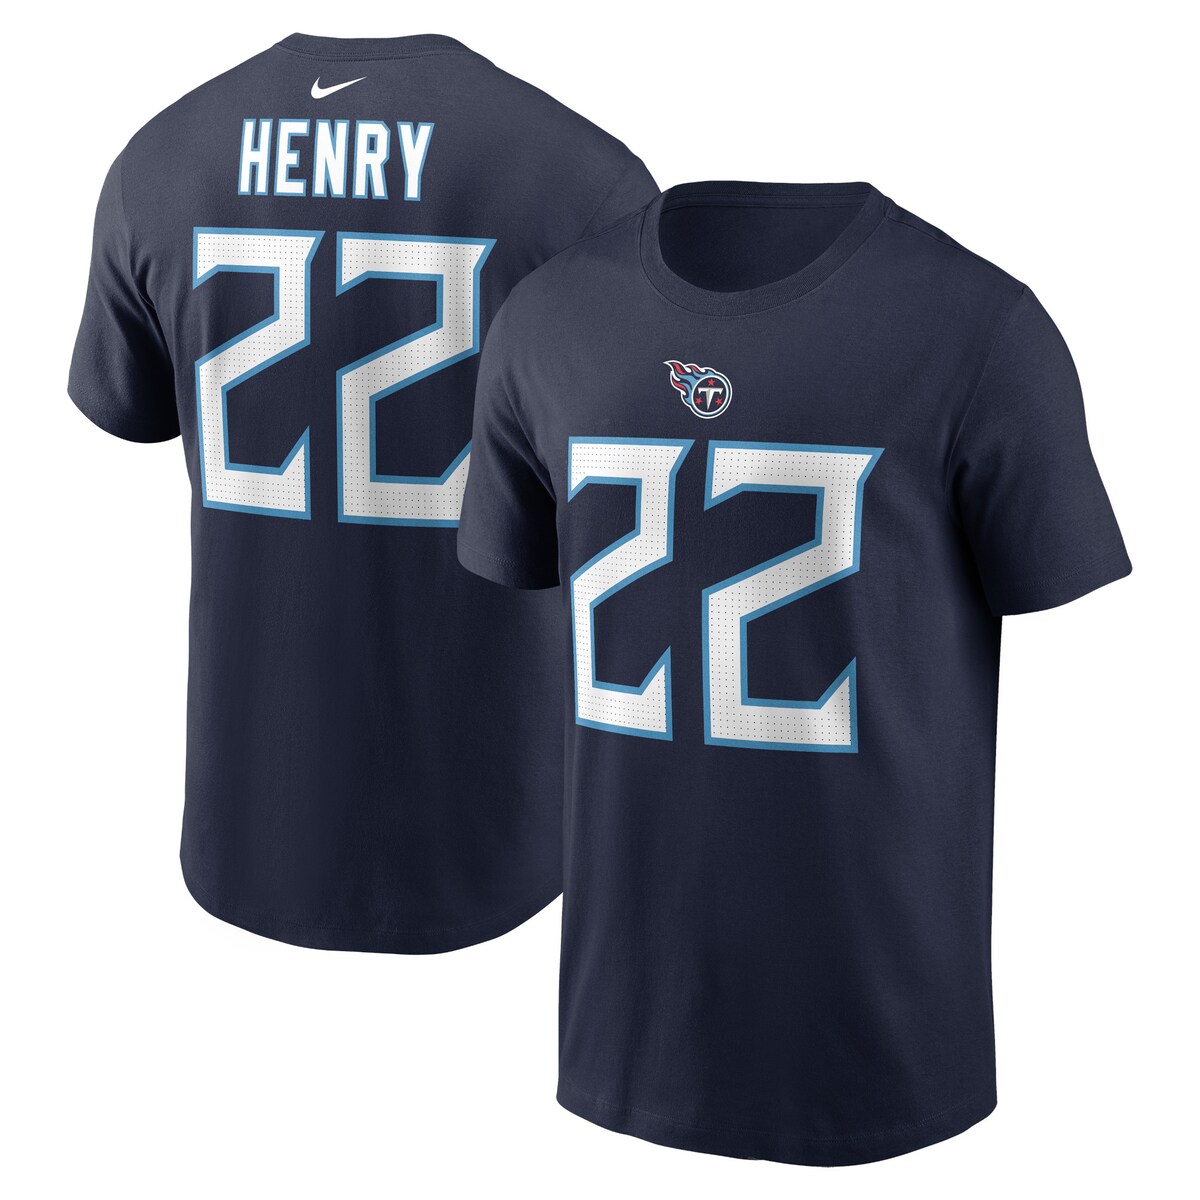 Derrick Henry is consistently one of the most dominant players on the gridiron. This Player Name and Number T-shirt from Nike is a strong tribute to your favorite player's career with the Tennessee Titans. Designed as a simple alternative to the on-field jerseys, this player tee features bold graphics on the front and back so you can proudly support your Tennessee Titans.Material: 100% CottonMachine wash, tumble dry lowOfficially licensedImportedCrew neckBrand: NikeShort sleeveScreen print graphics